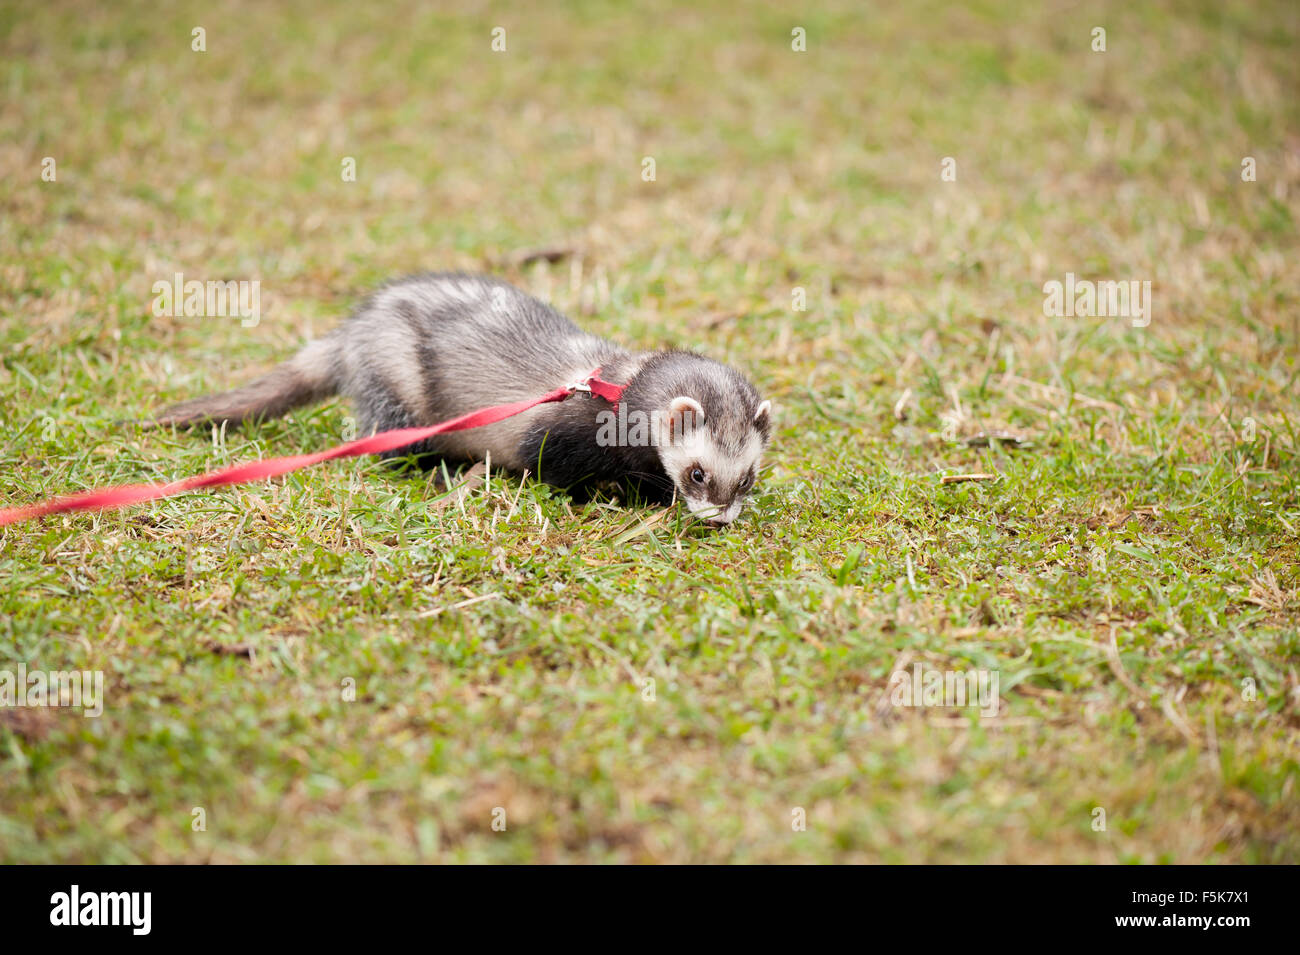 Polecat ferret hybrid on grass, domesticated animal in red lead standing on the grass, horizontal orientation, nobody... Stock Photo